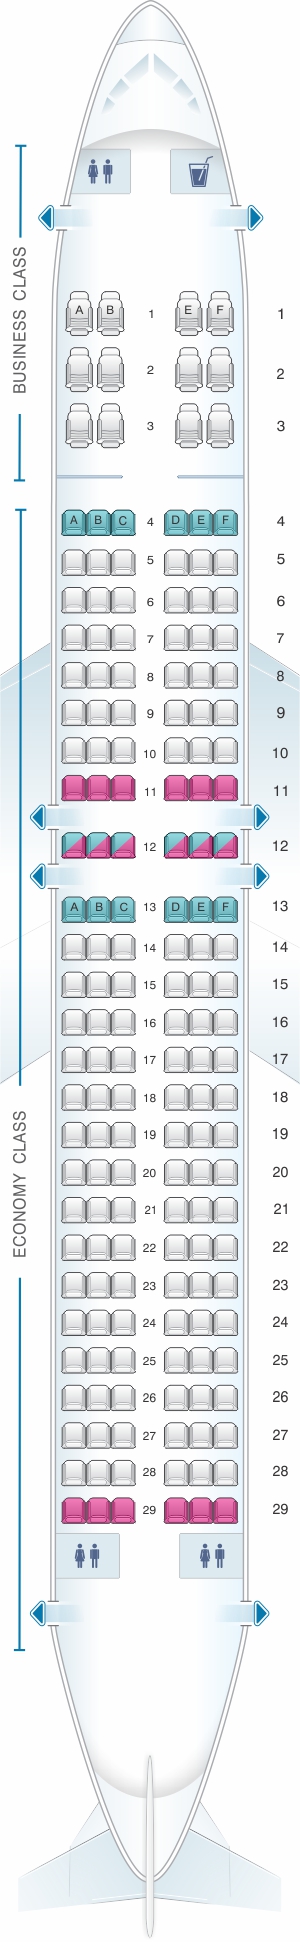 Seat map for SpiceJet Boeing B737 800 config.2